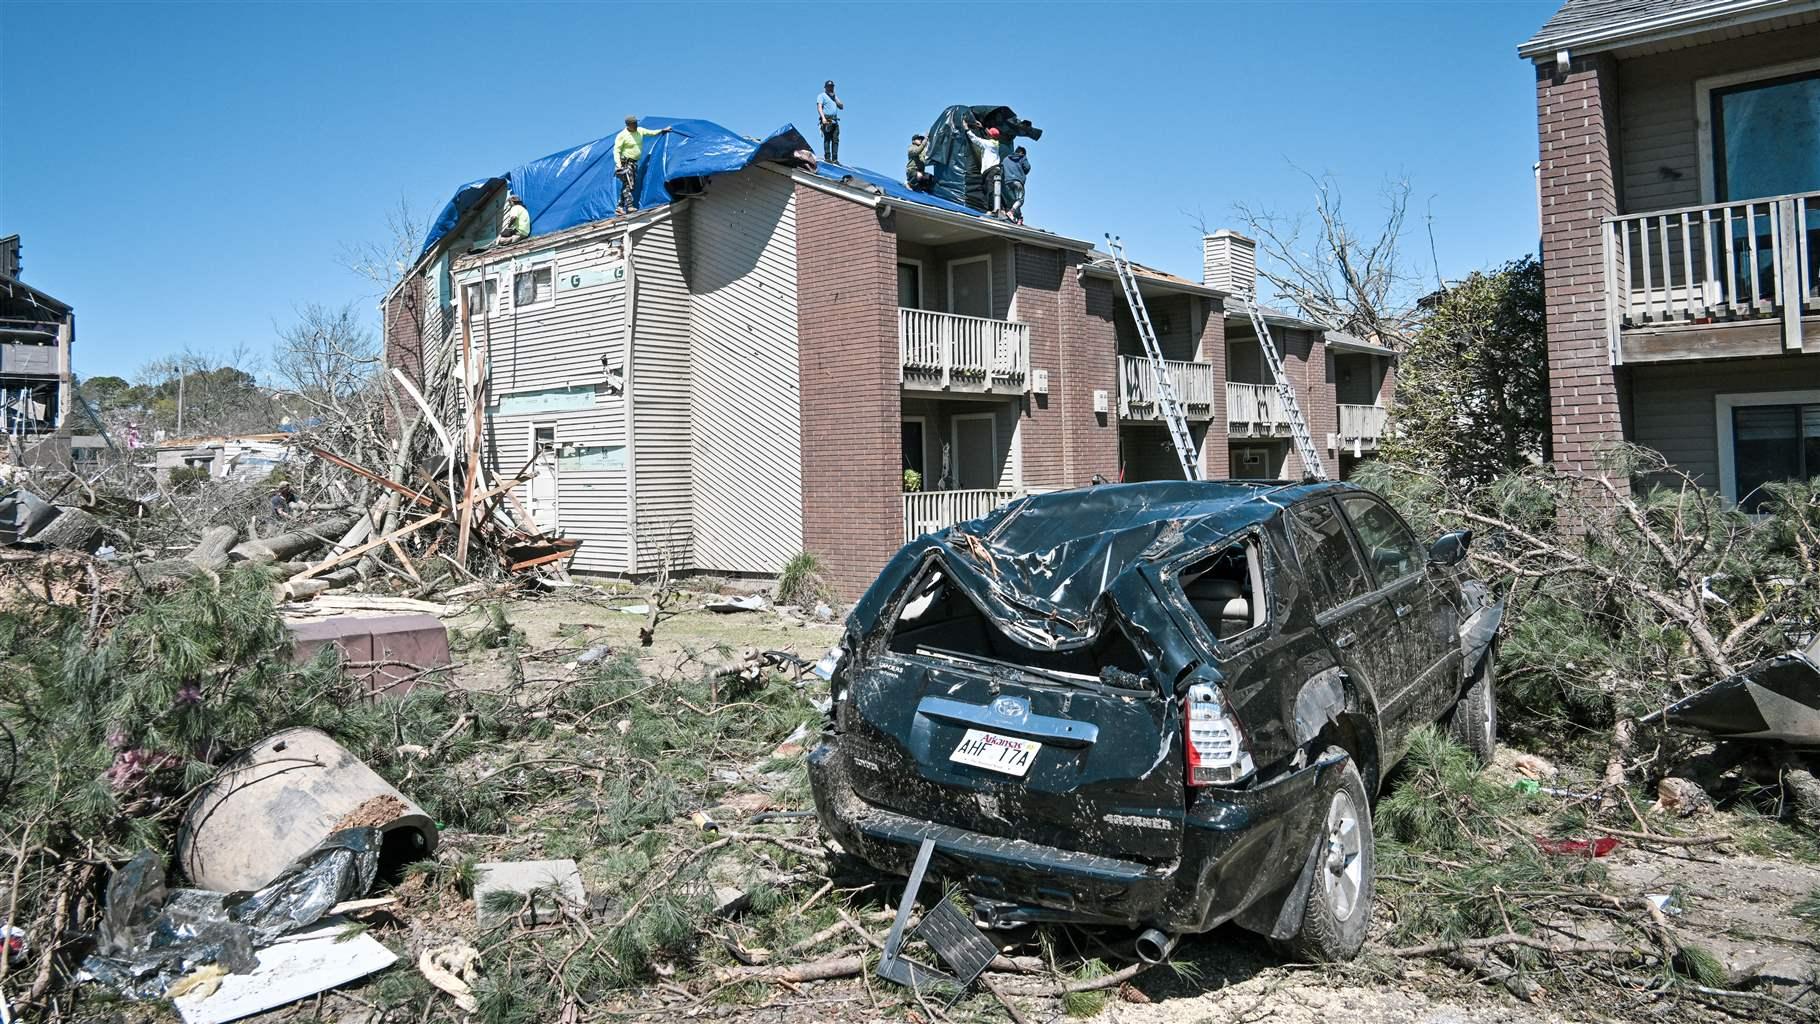 Six workers secure a large blue tarp on the roof of a two-story condominium under a cloudless blue sky. In the foreground is a badly damaged black SUV, along with large branches and pieces of homes—evidence that a strong storm recently struck.   